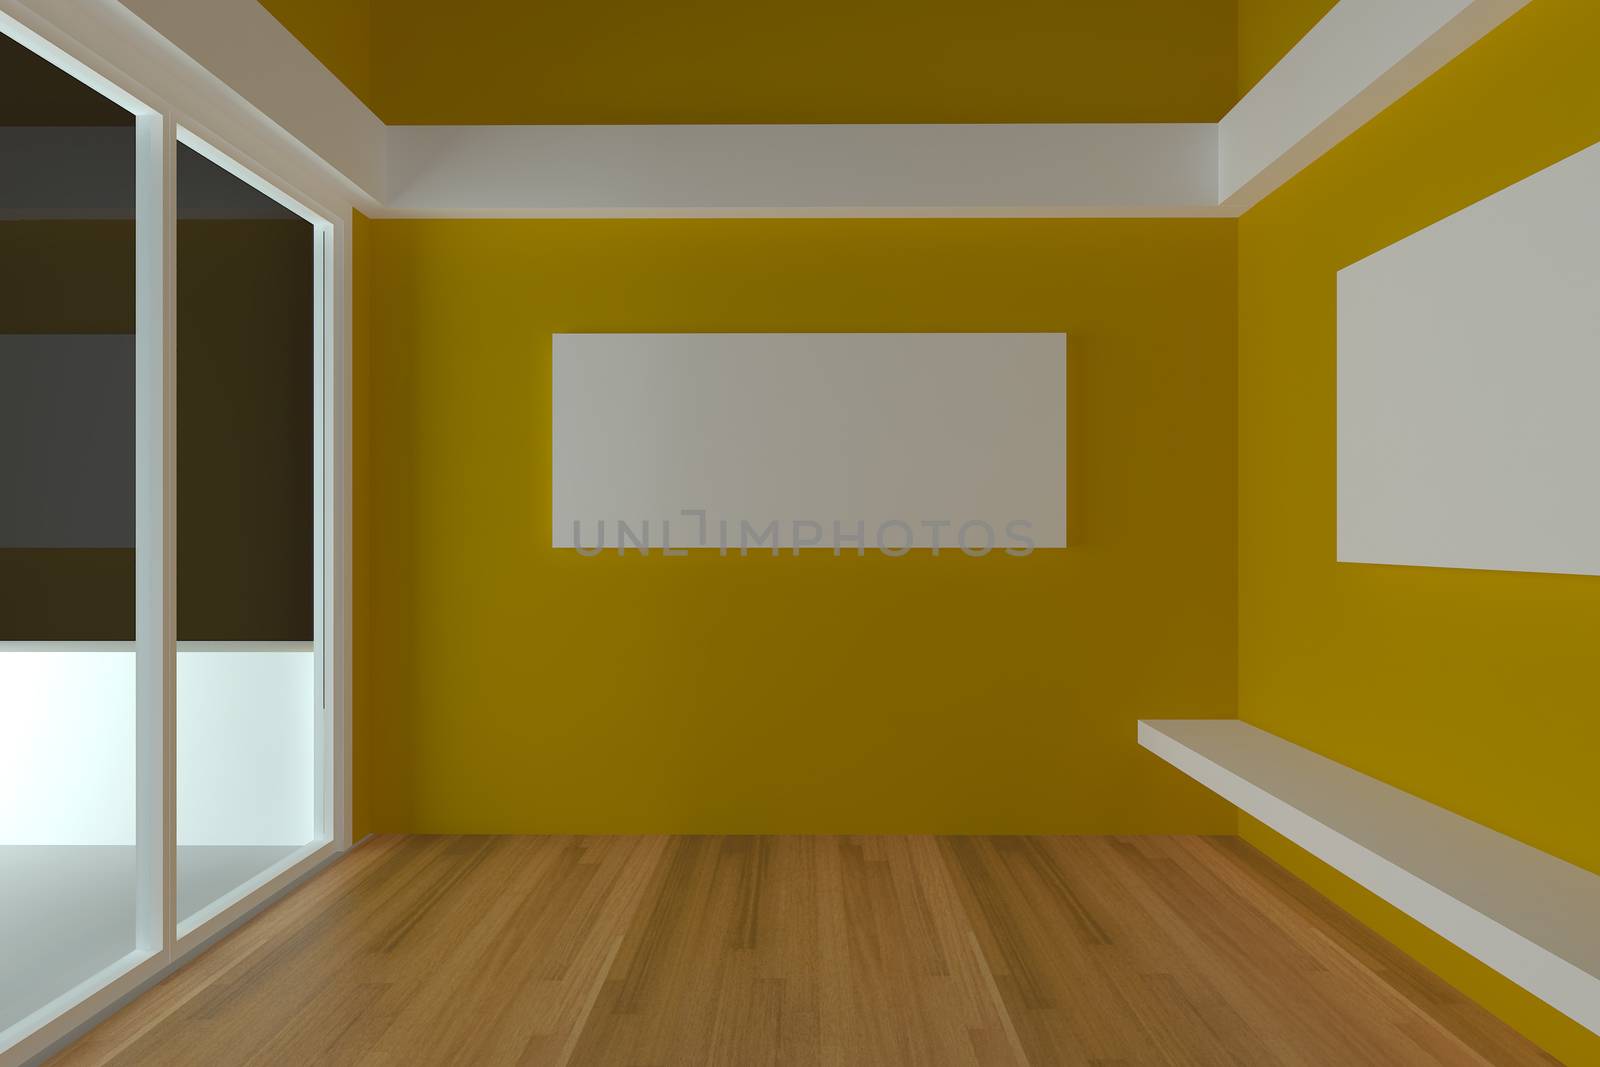 Home interior rendering with empty room color yellow wall and decorated with wood floors. 